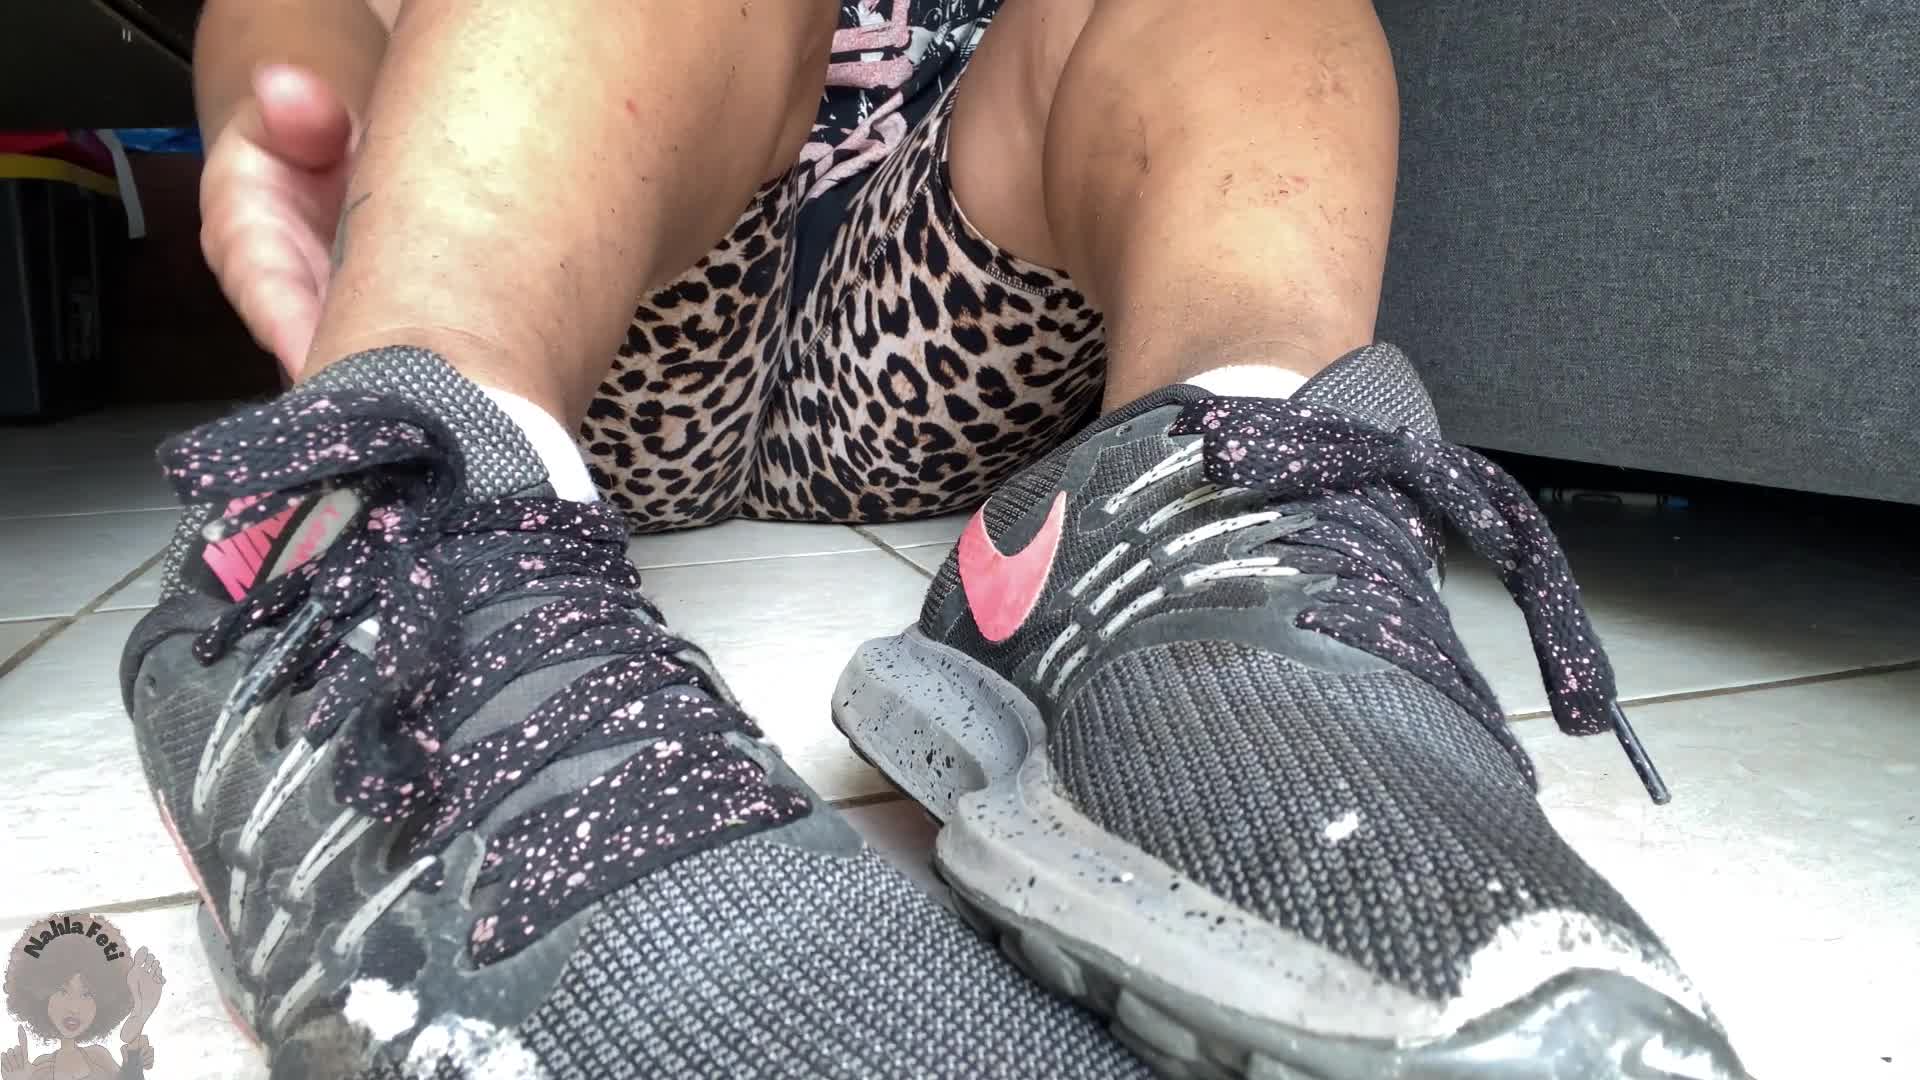 Foot Fetish Porn Video Clips For Sale at iWantClips Page 329 